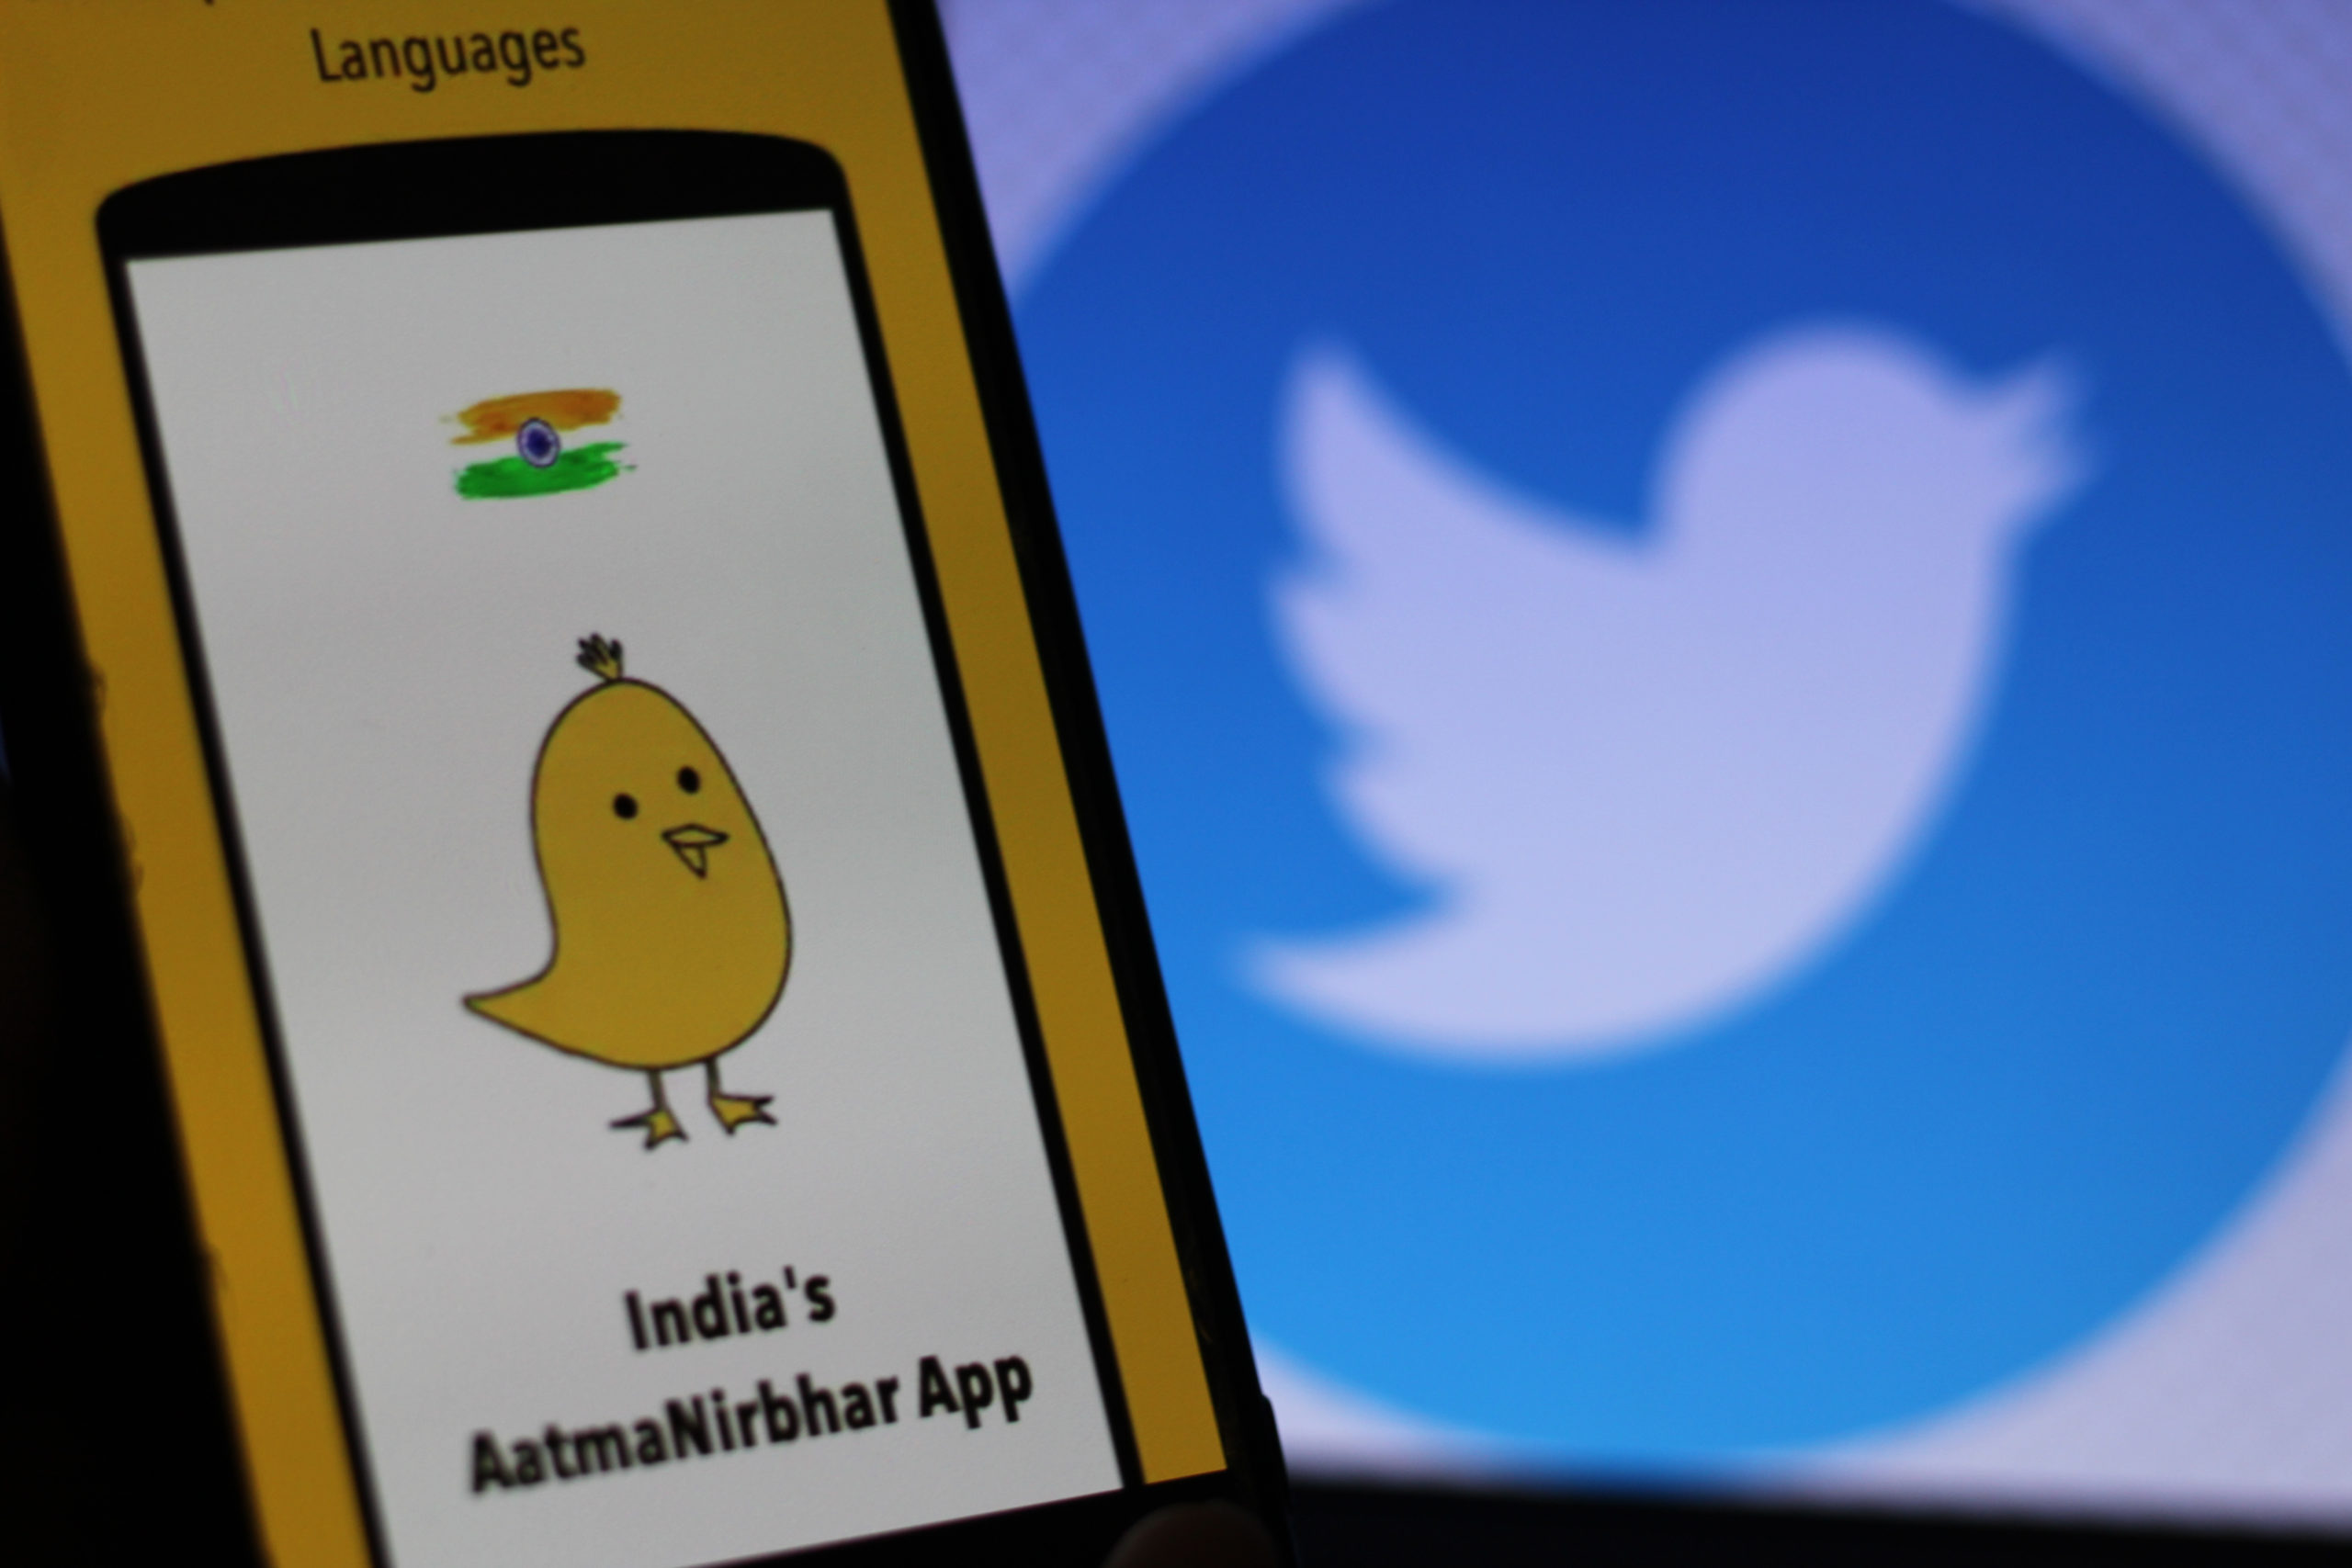 Twitter’s Indian competitor Koo raises USD 30 million as India tightens social media grip